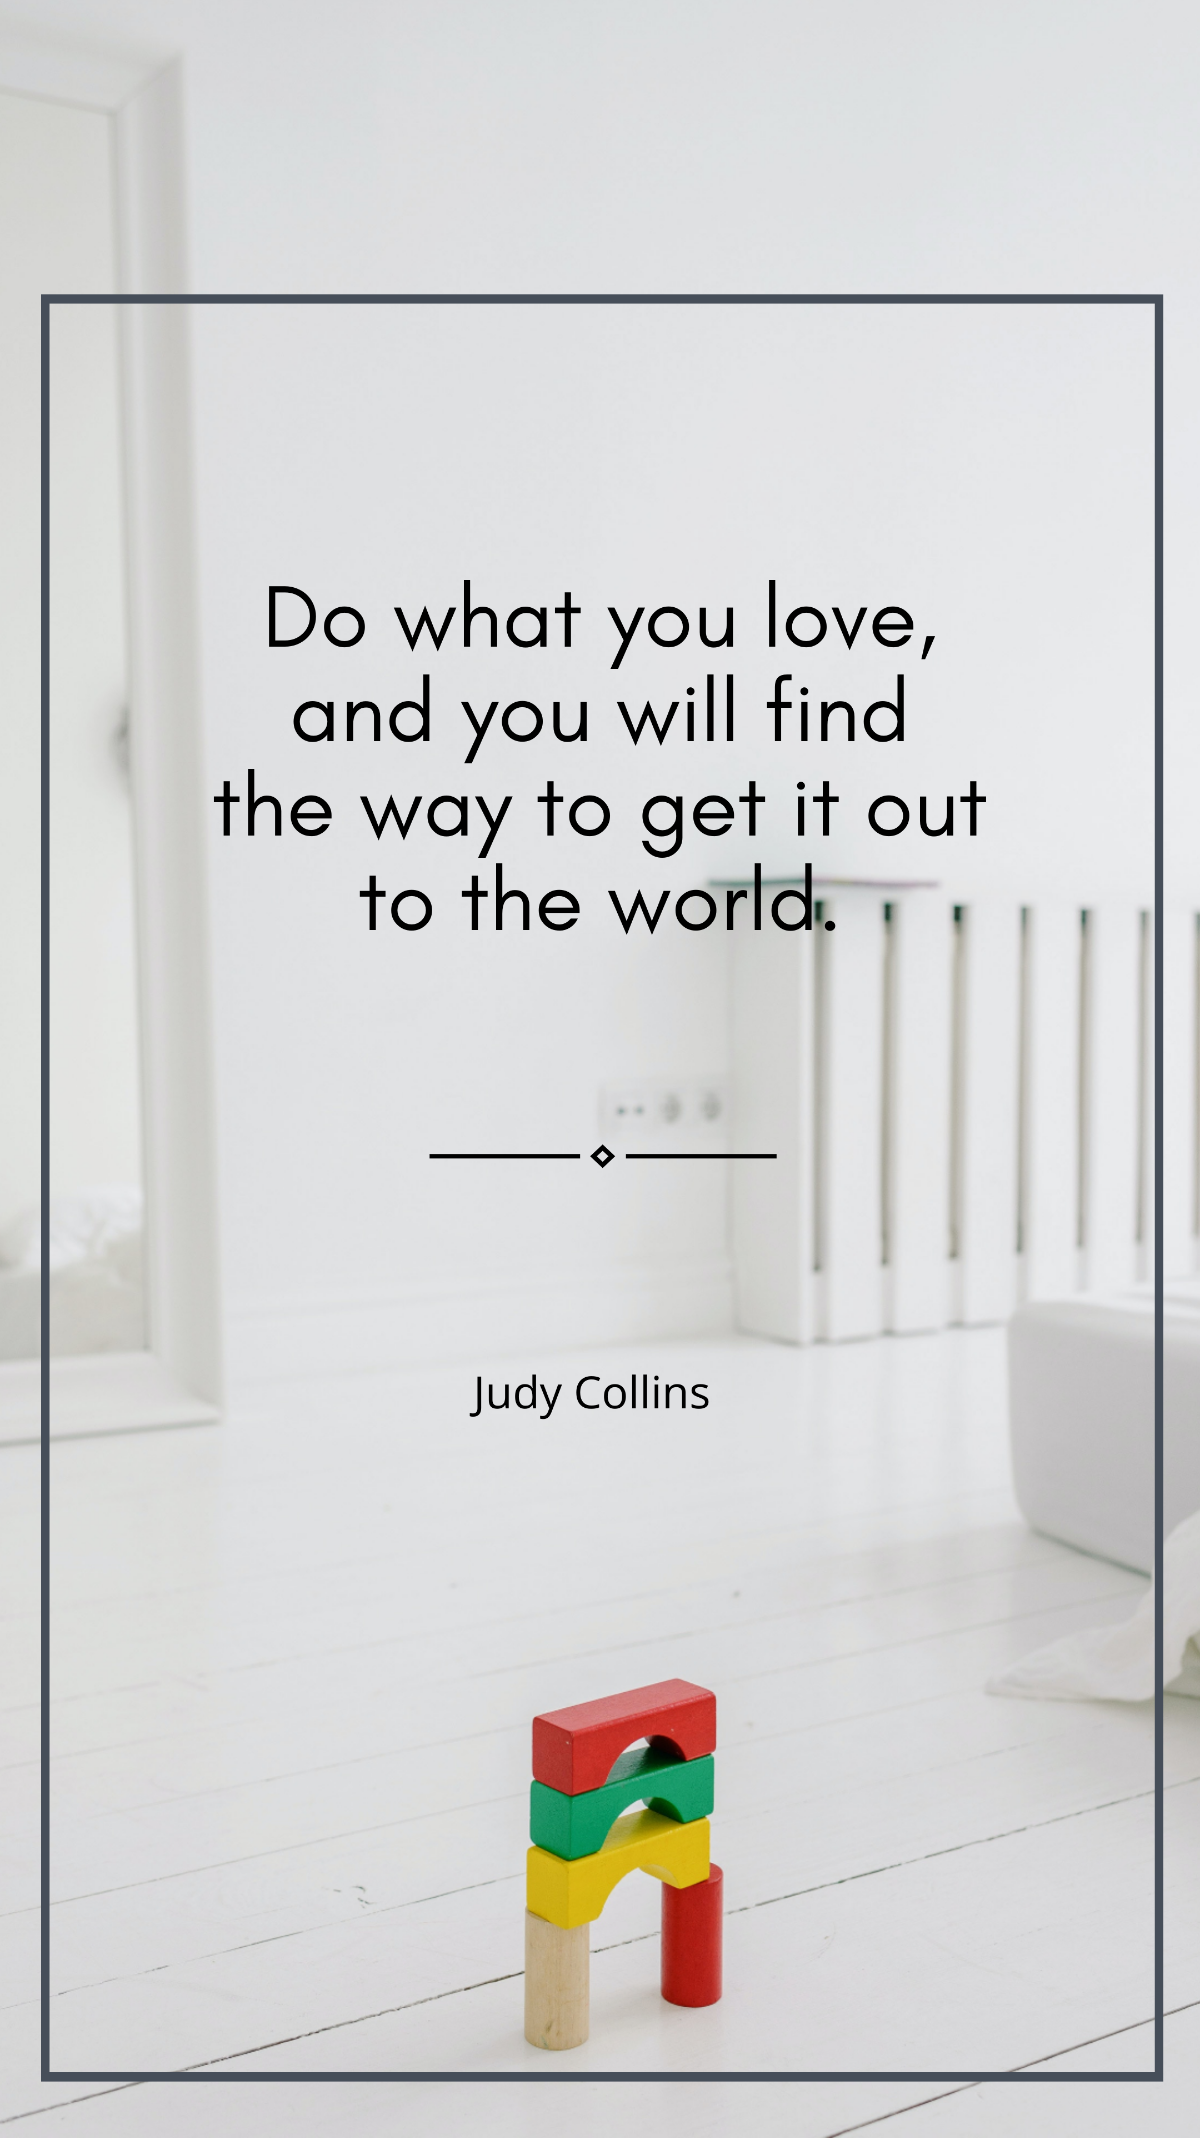 Judy Collins - “Do what you love, and you will find the way to get it out to the world.” Template